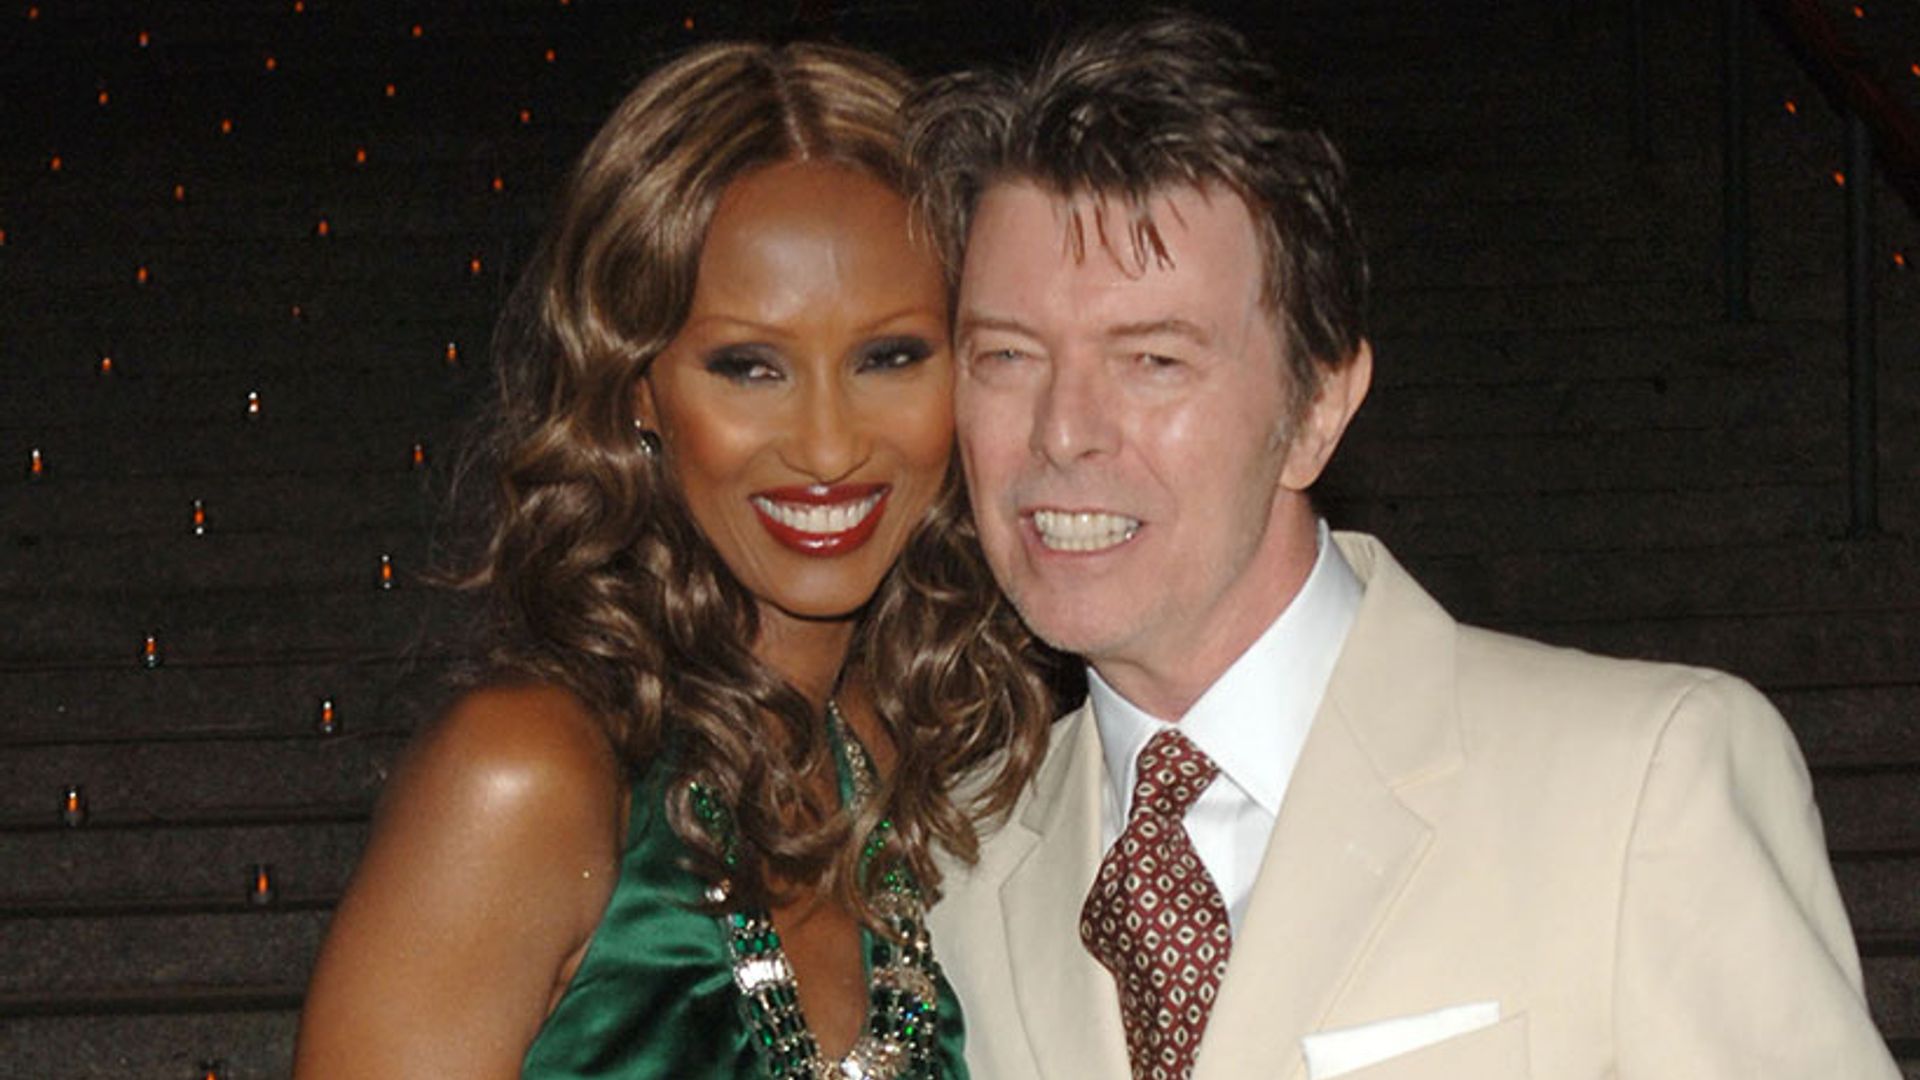 Iman and daughter Lexi get matching David Bowie tattoos - see their tribute to late singer